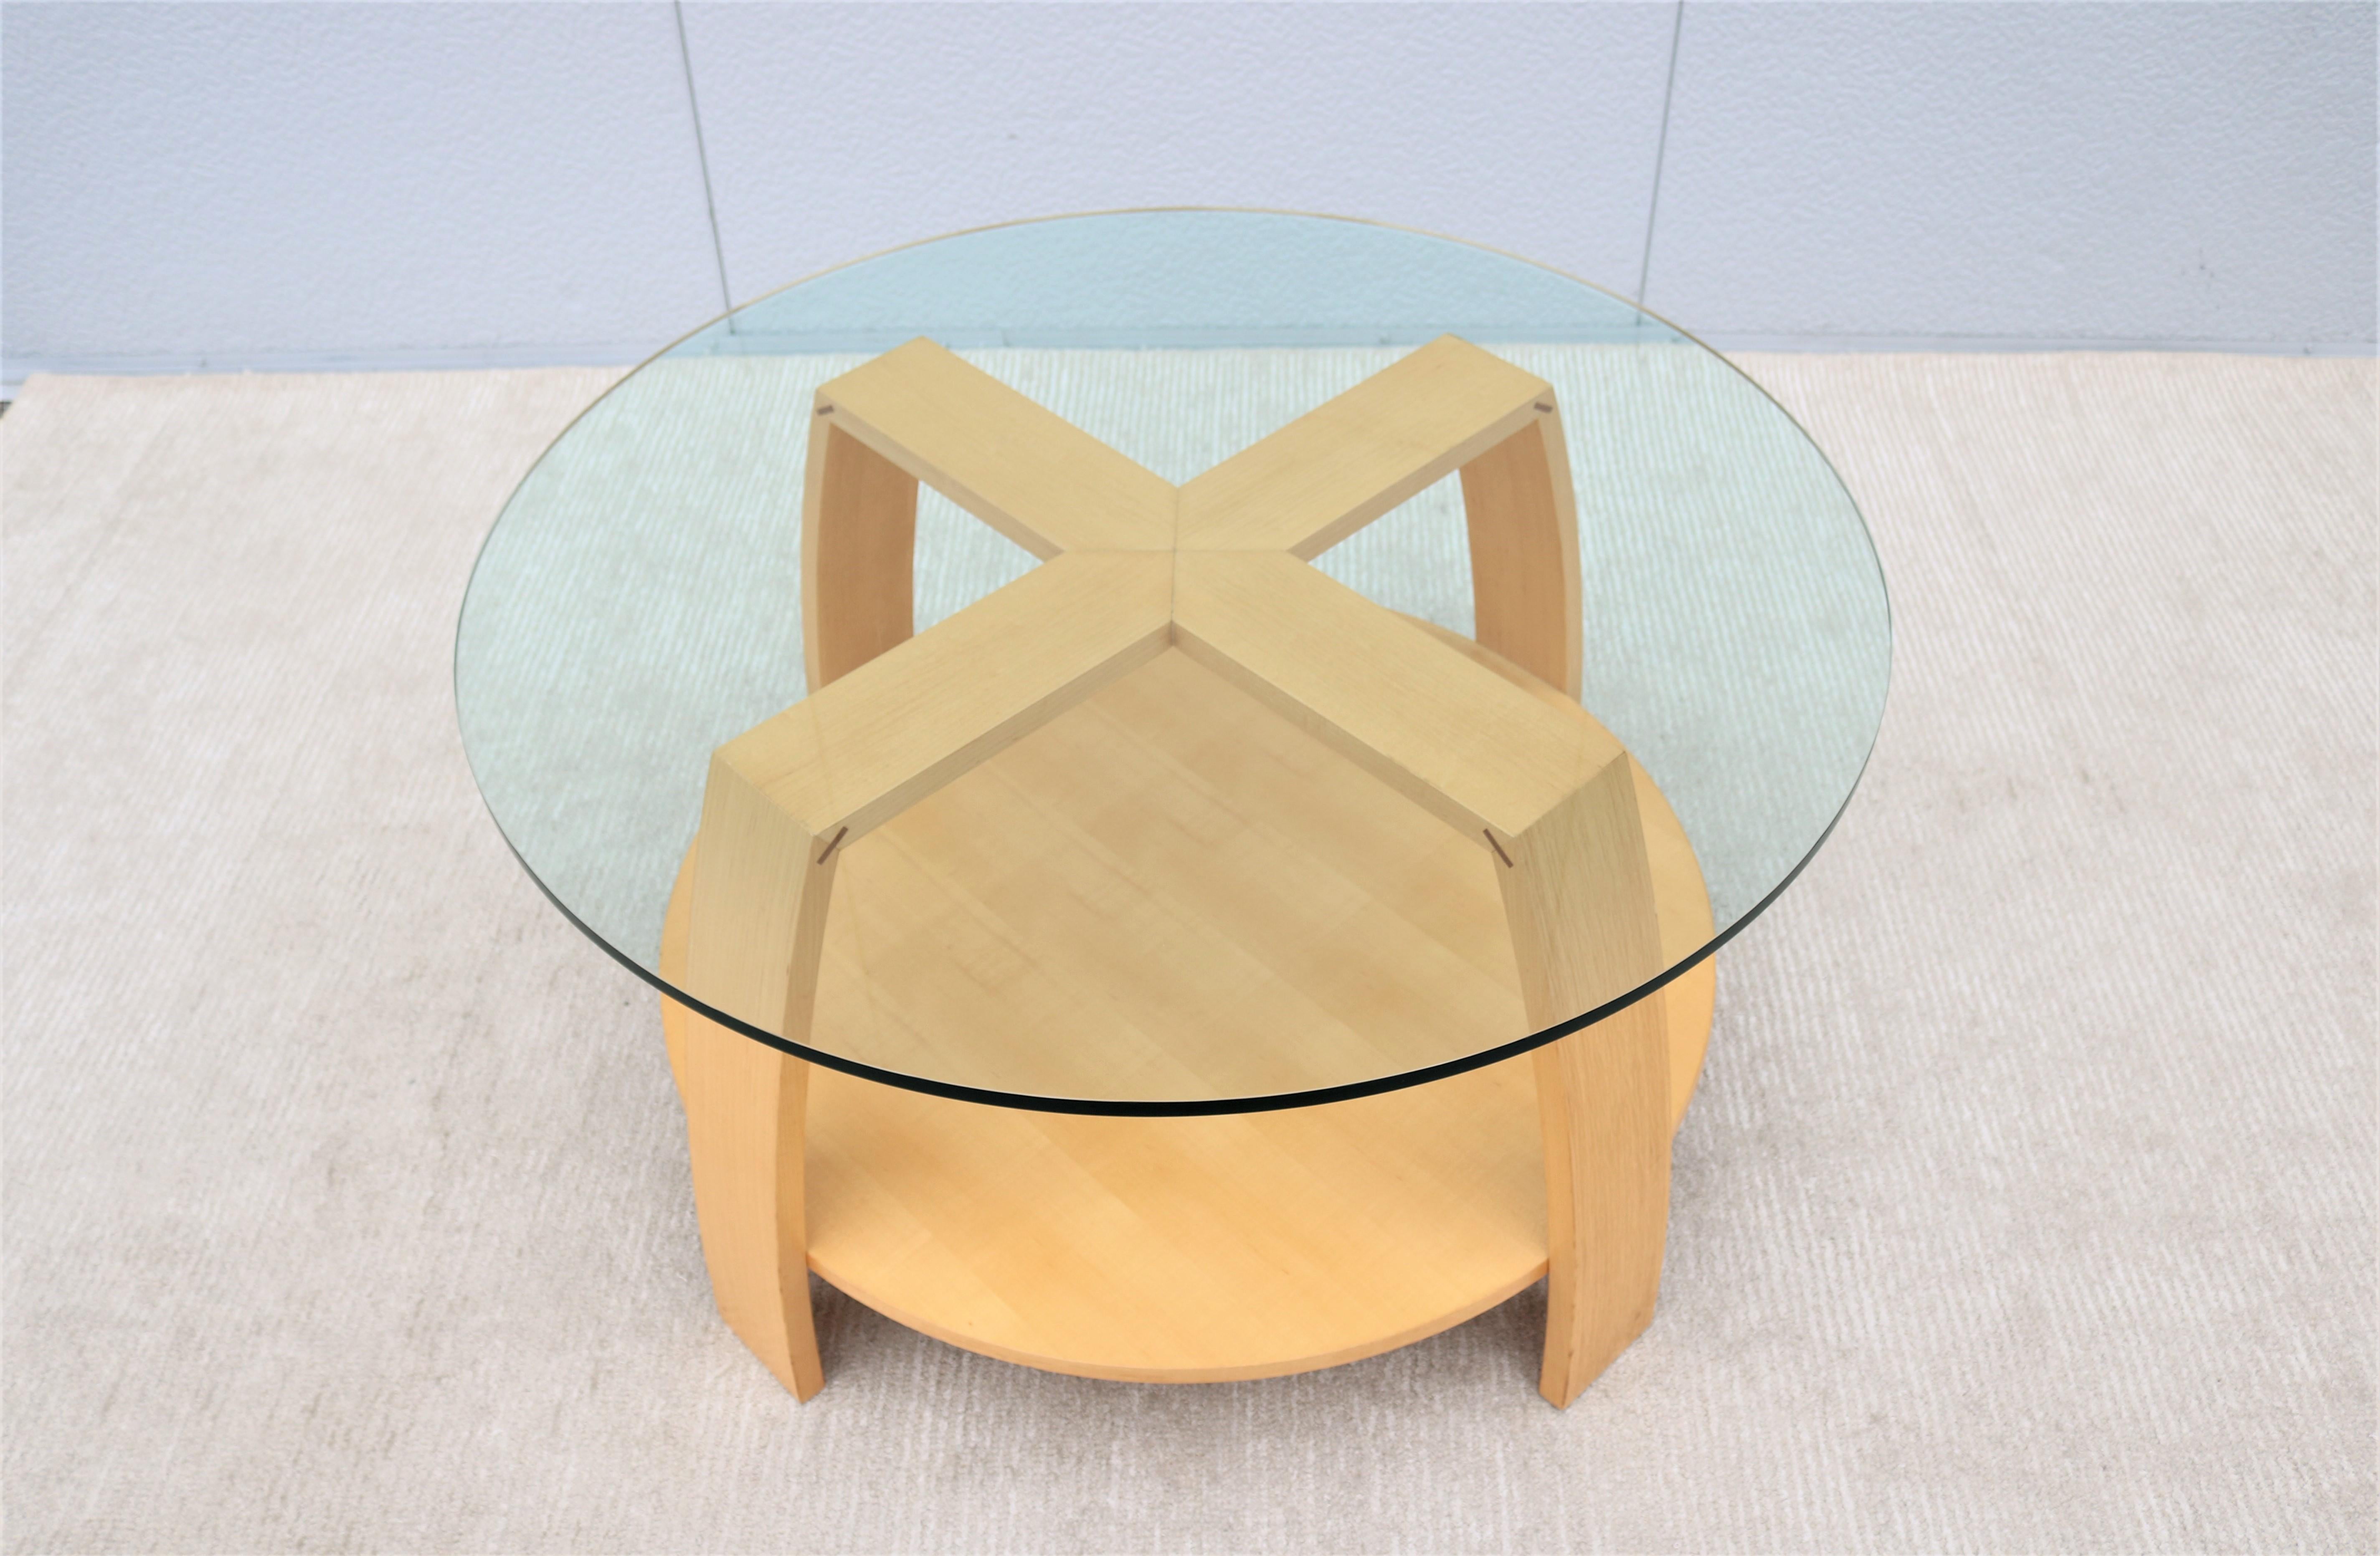 marks coffee table